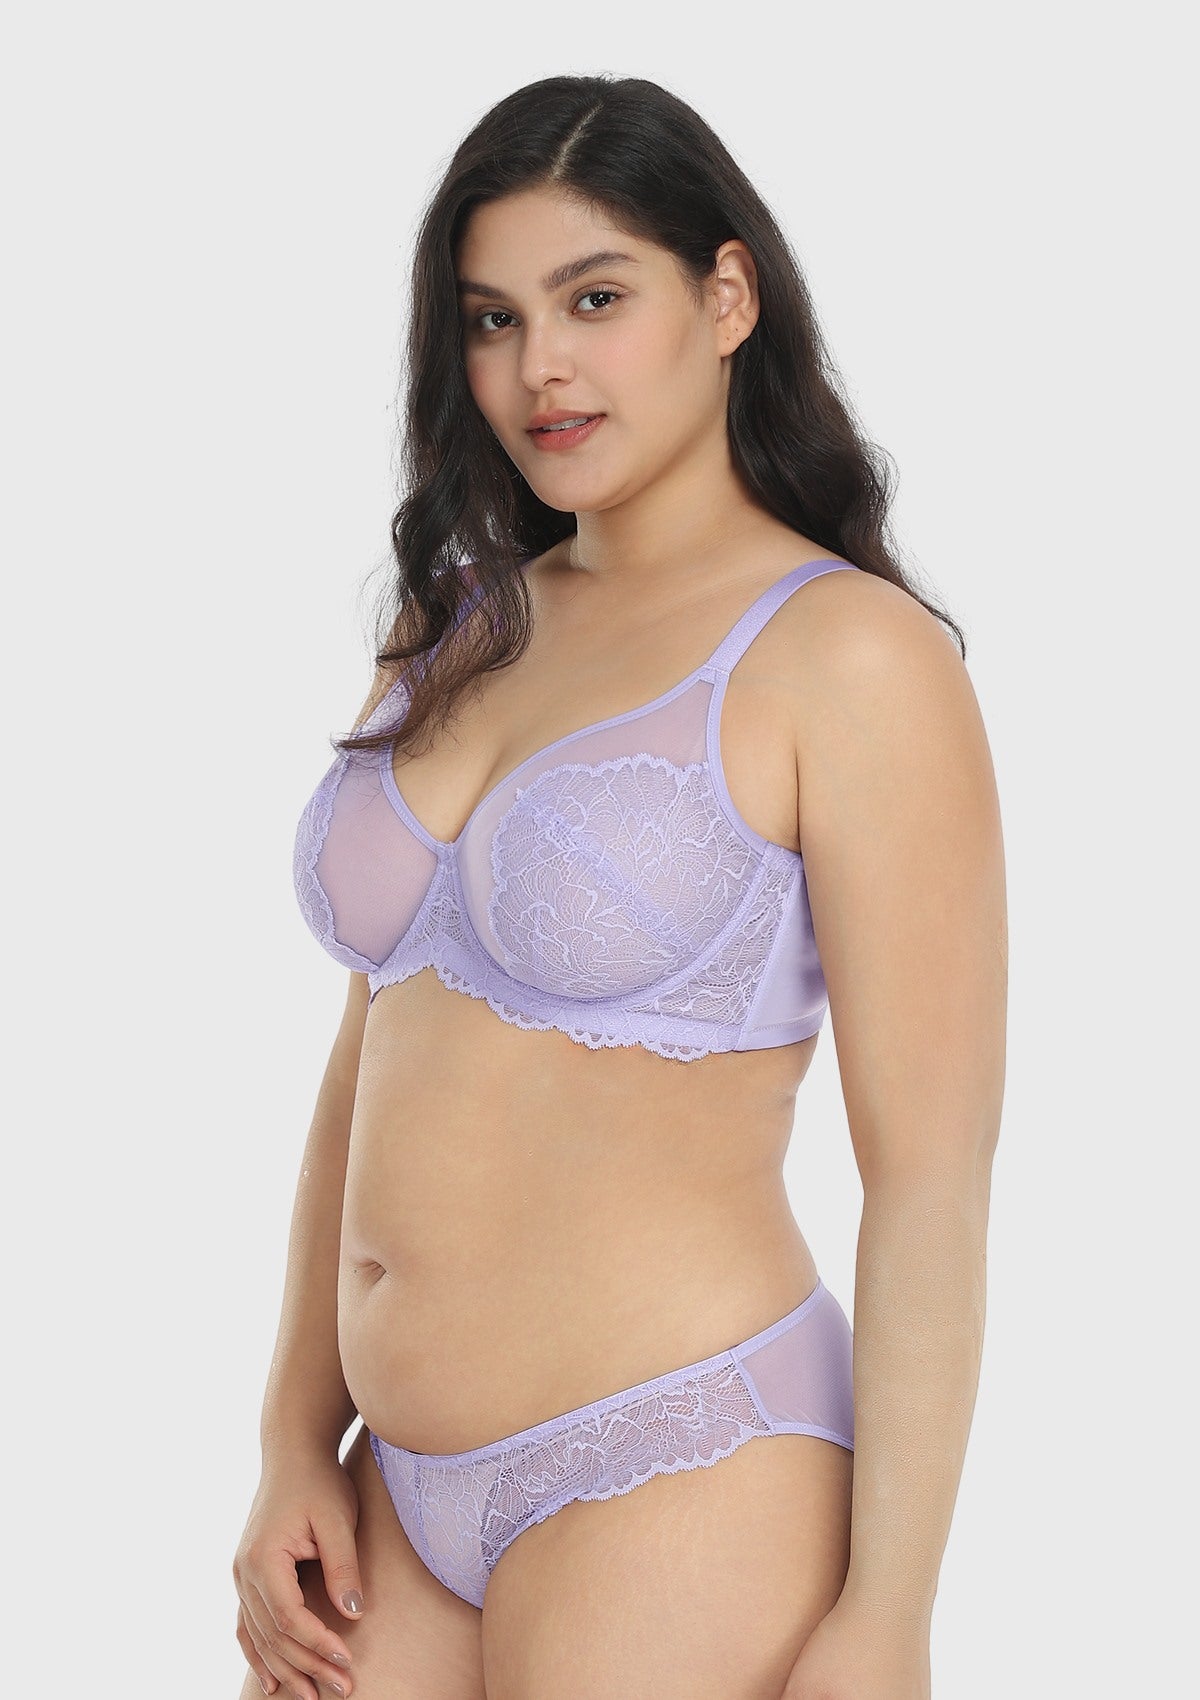 HSIA Blossom Transparent Lace Bra: Plus Size Wired Back Smoothing Bra - Light Purple / 34 / C